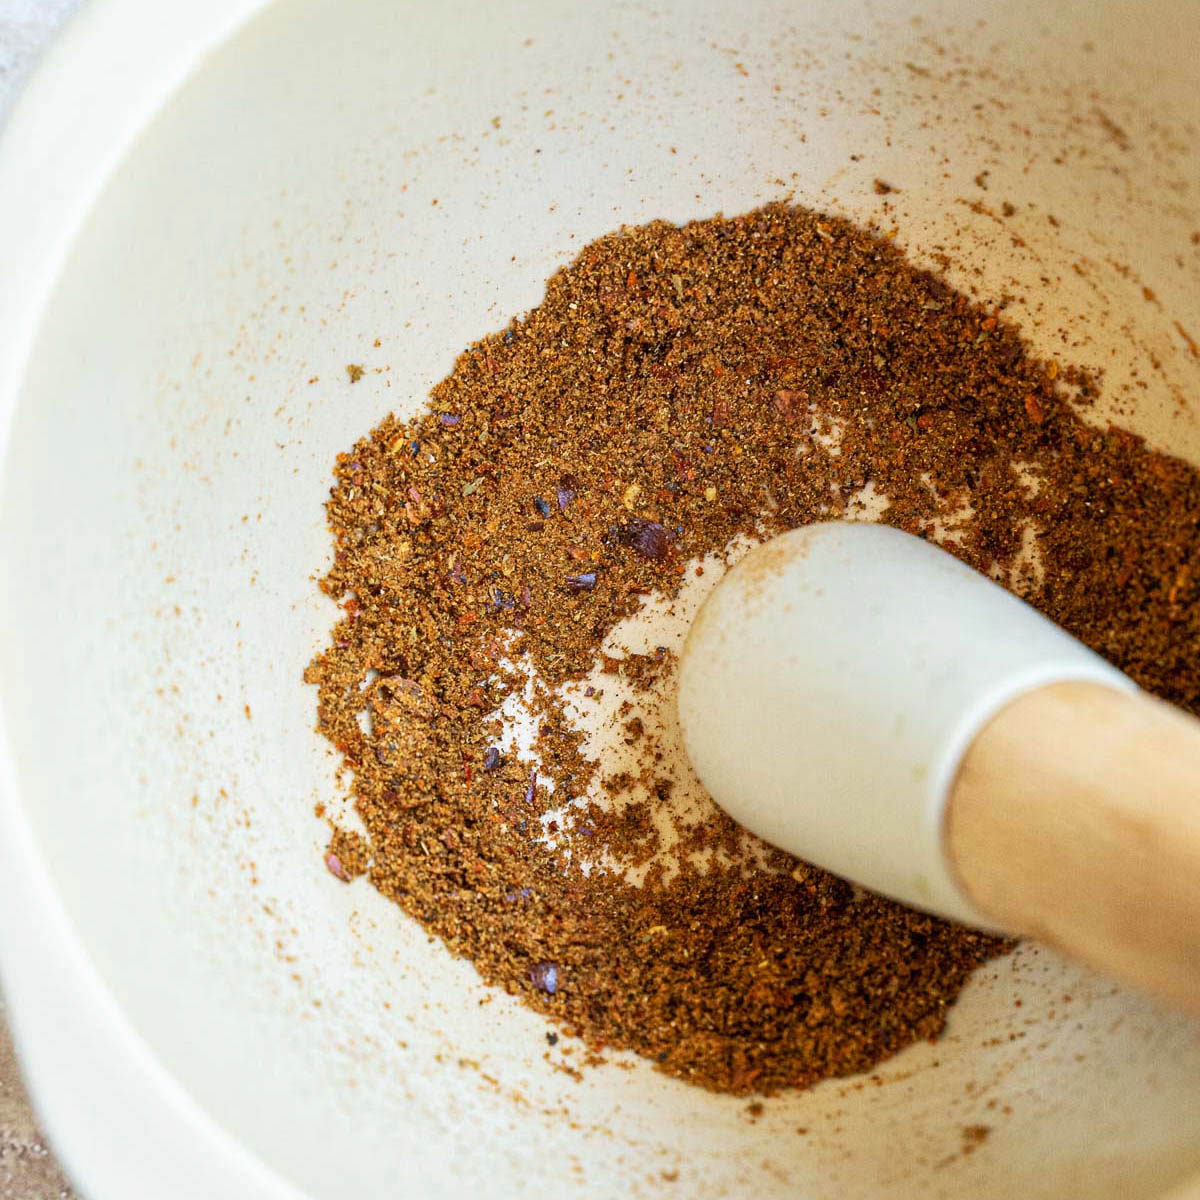 The spices grounded in a pestle and mortar.